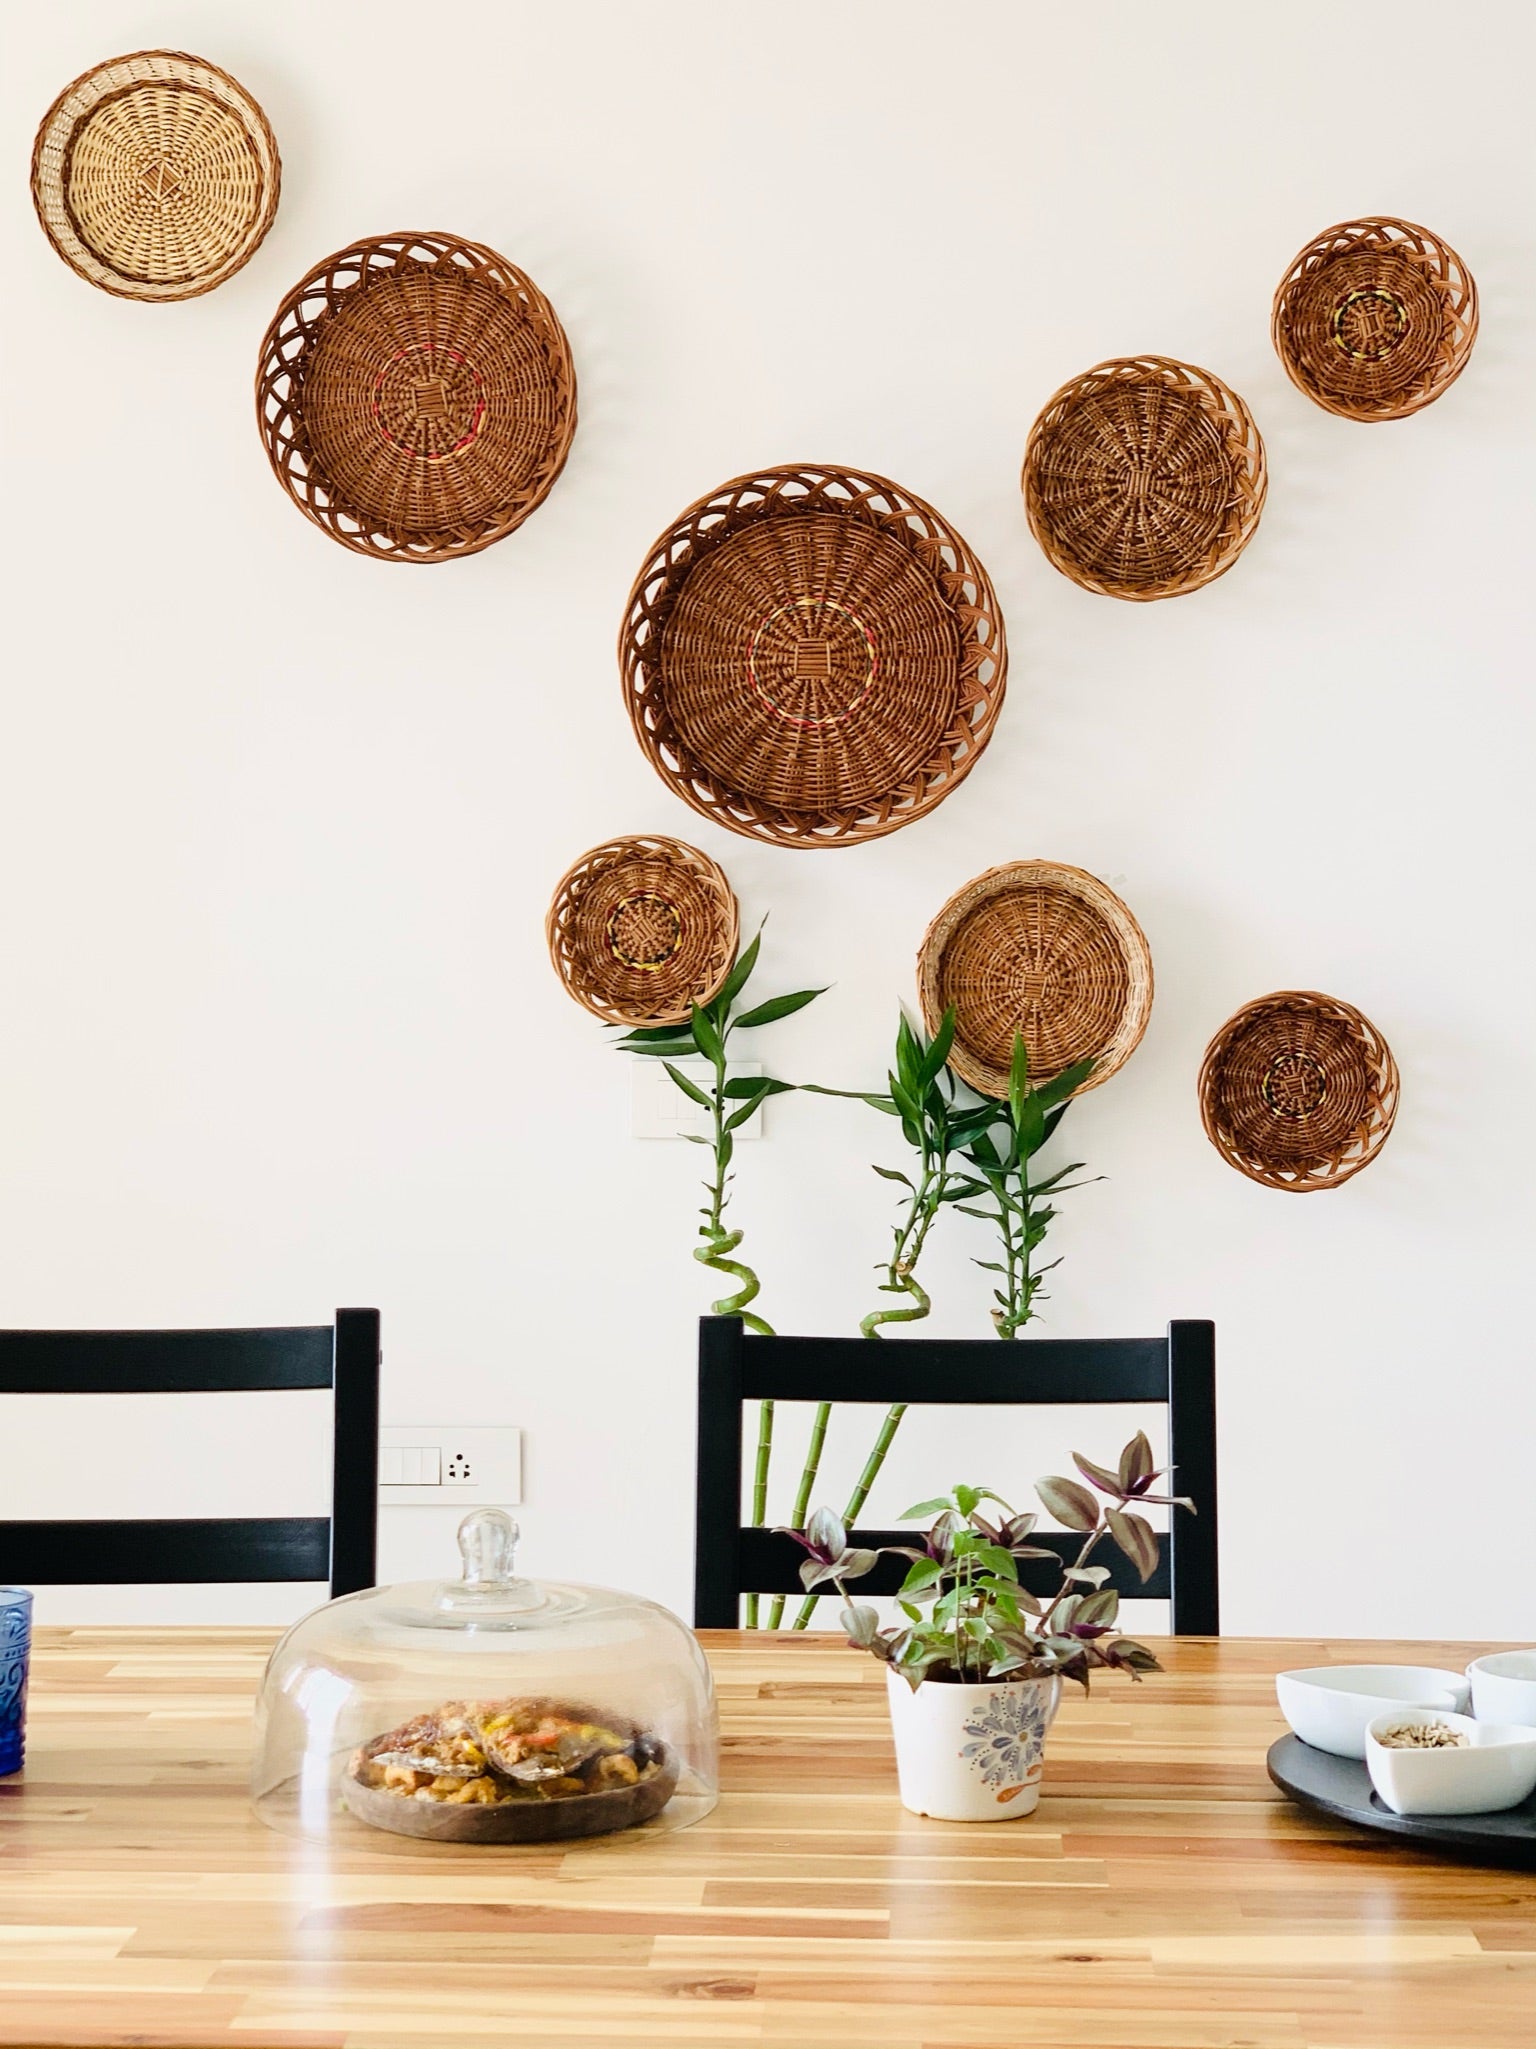 Basket put on wall for wall decor on dining table